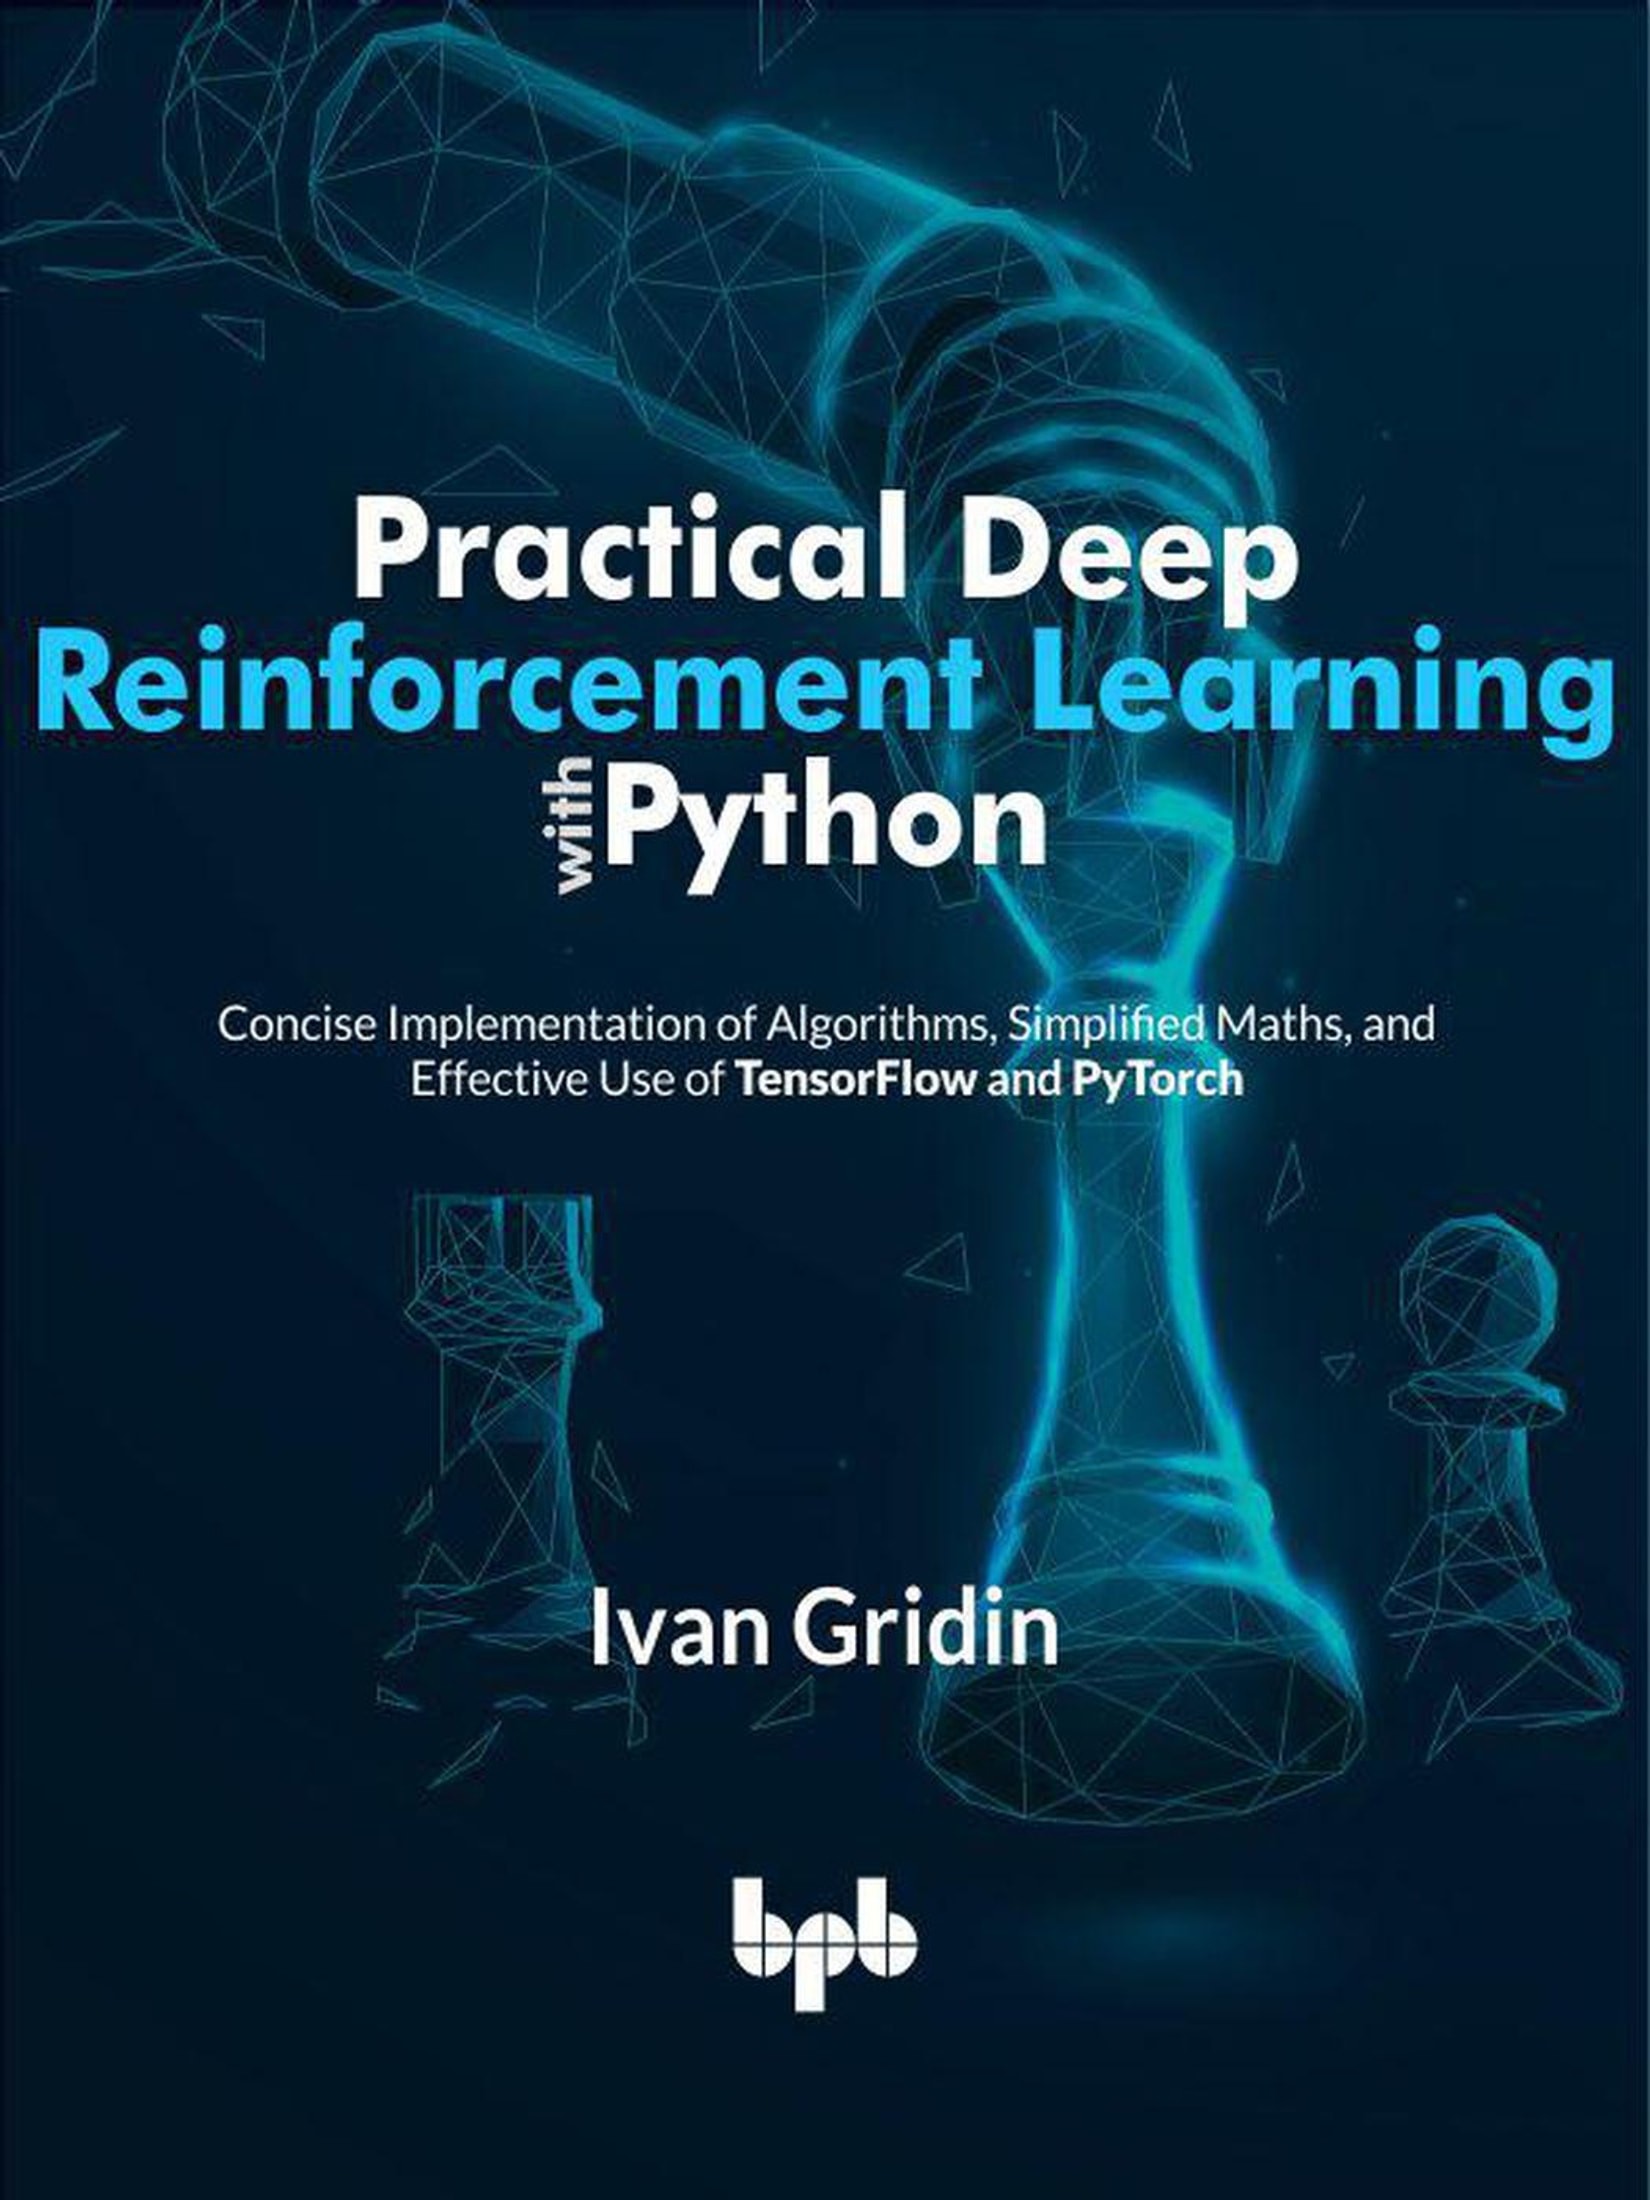 Practical Deep Reinforcement Learning with Python: Concise Implementation of Algorithms, Simplified Maths, and Effective Use of TensorFlow and PyTorch (English Edition)